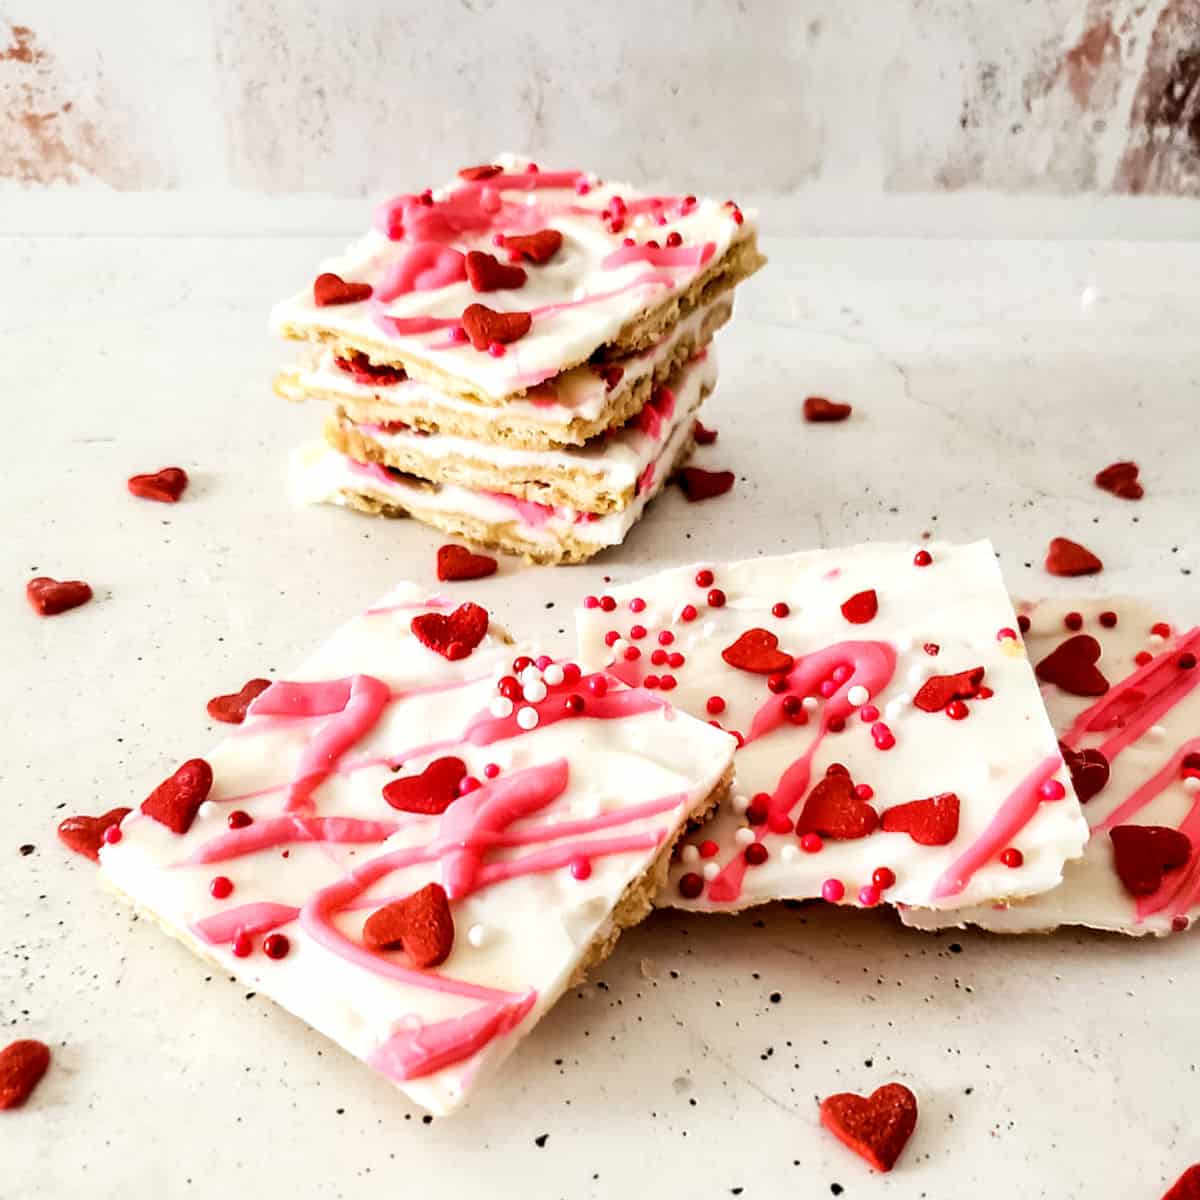 Cracker candy with white chocolate and red sprinkles.